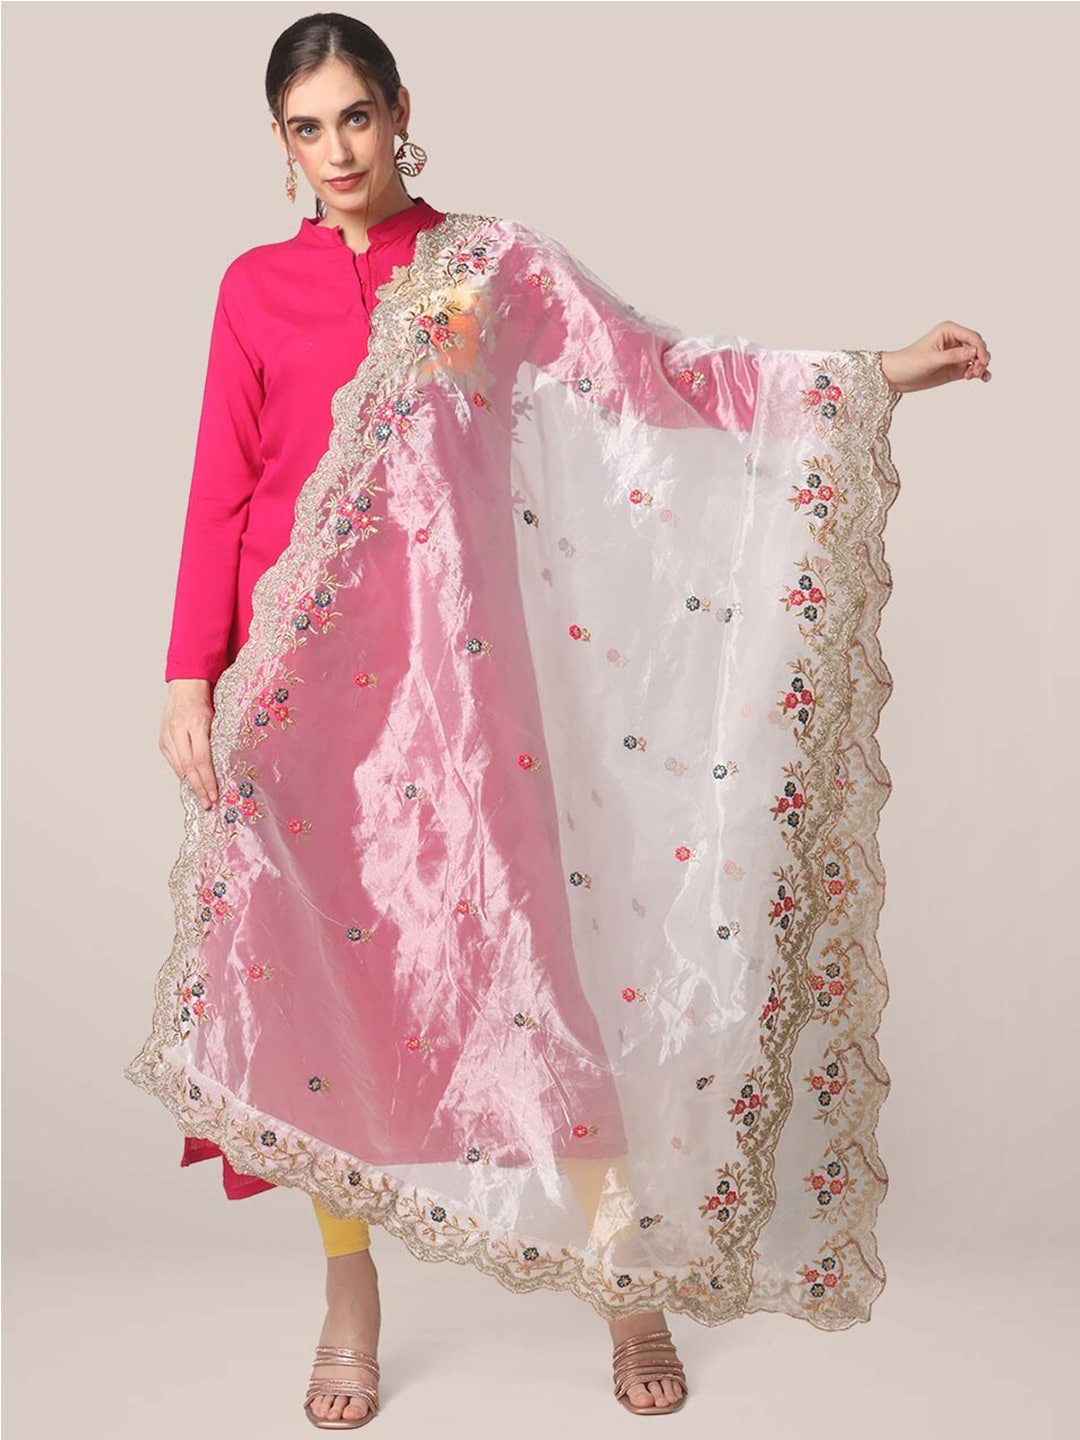 Dupatta Bazaar White & Gold-Toned Embroidered Organza Dupatta with Sequinned